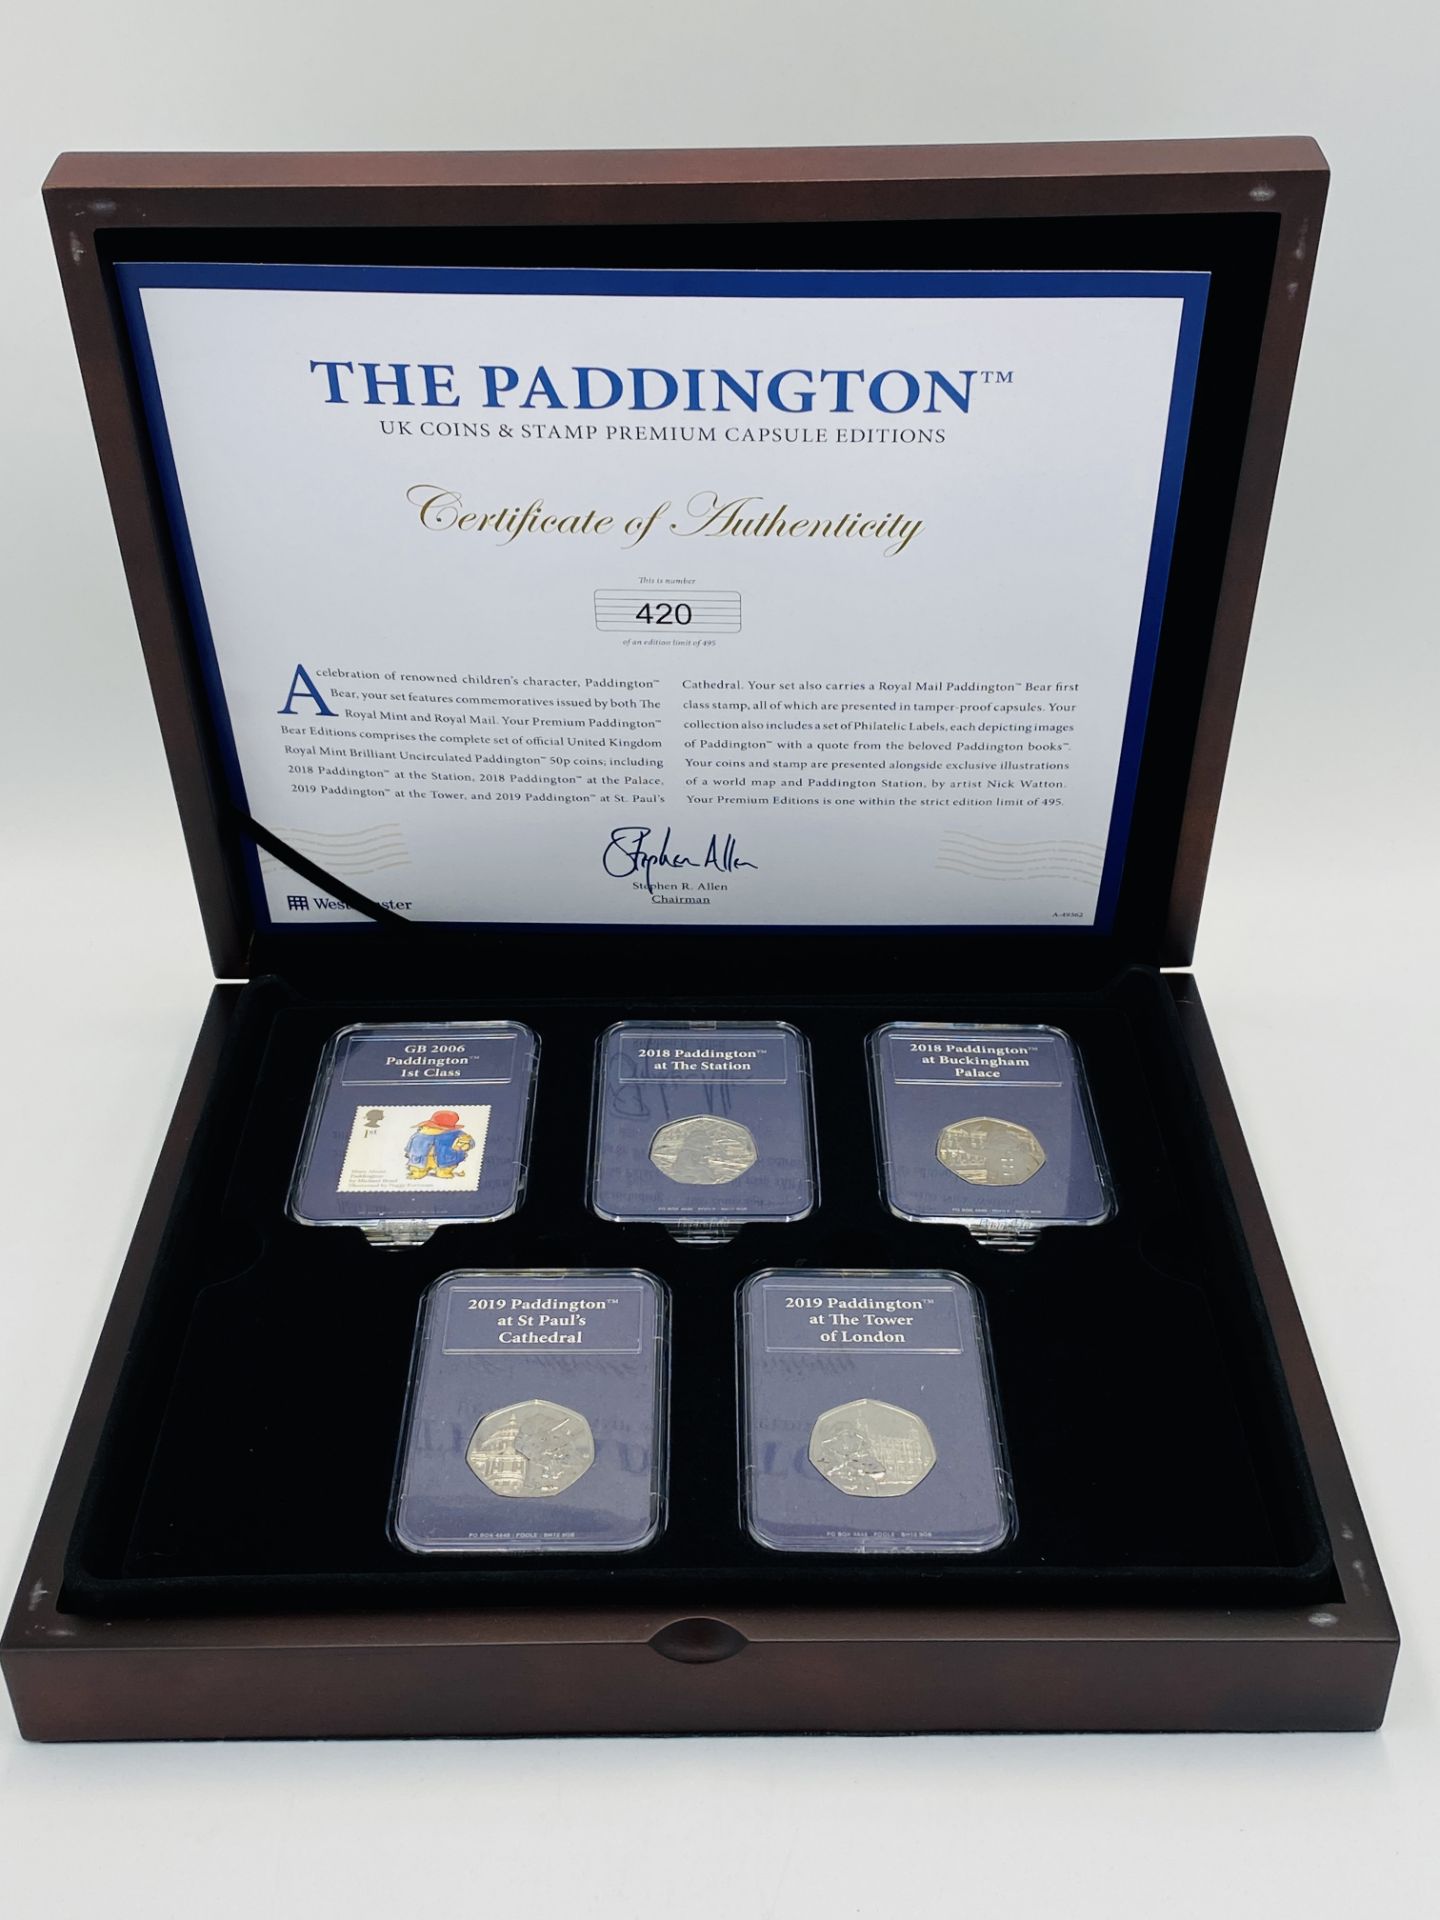 Westminster Limited Edition Paddington Coin and Stamp Capsule collection